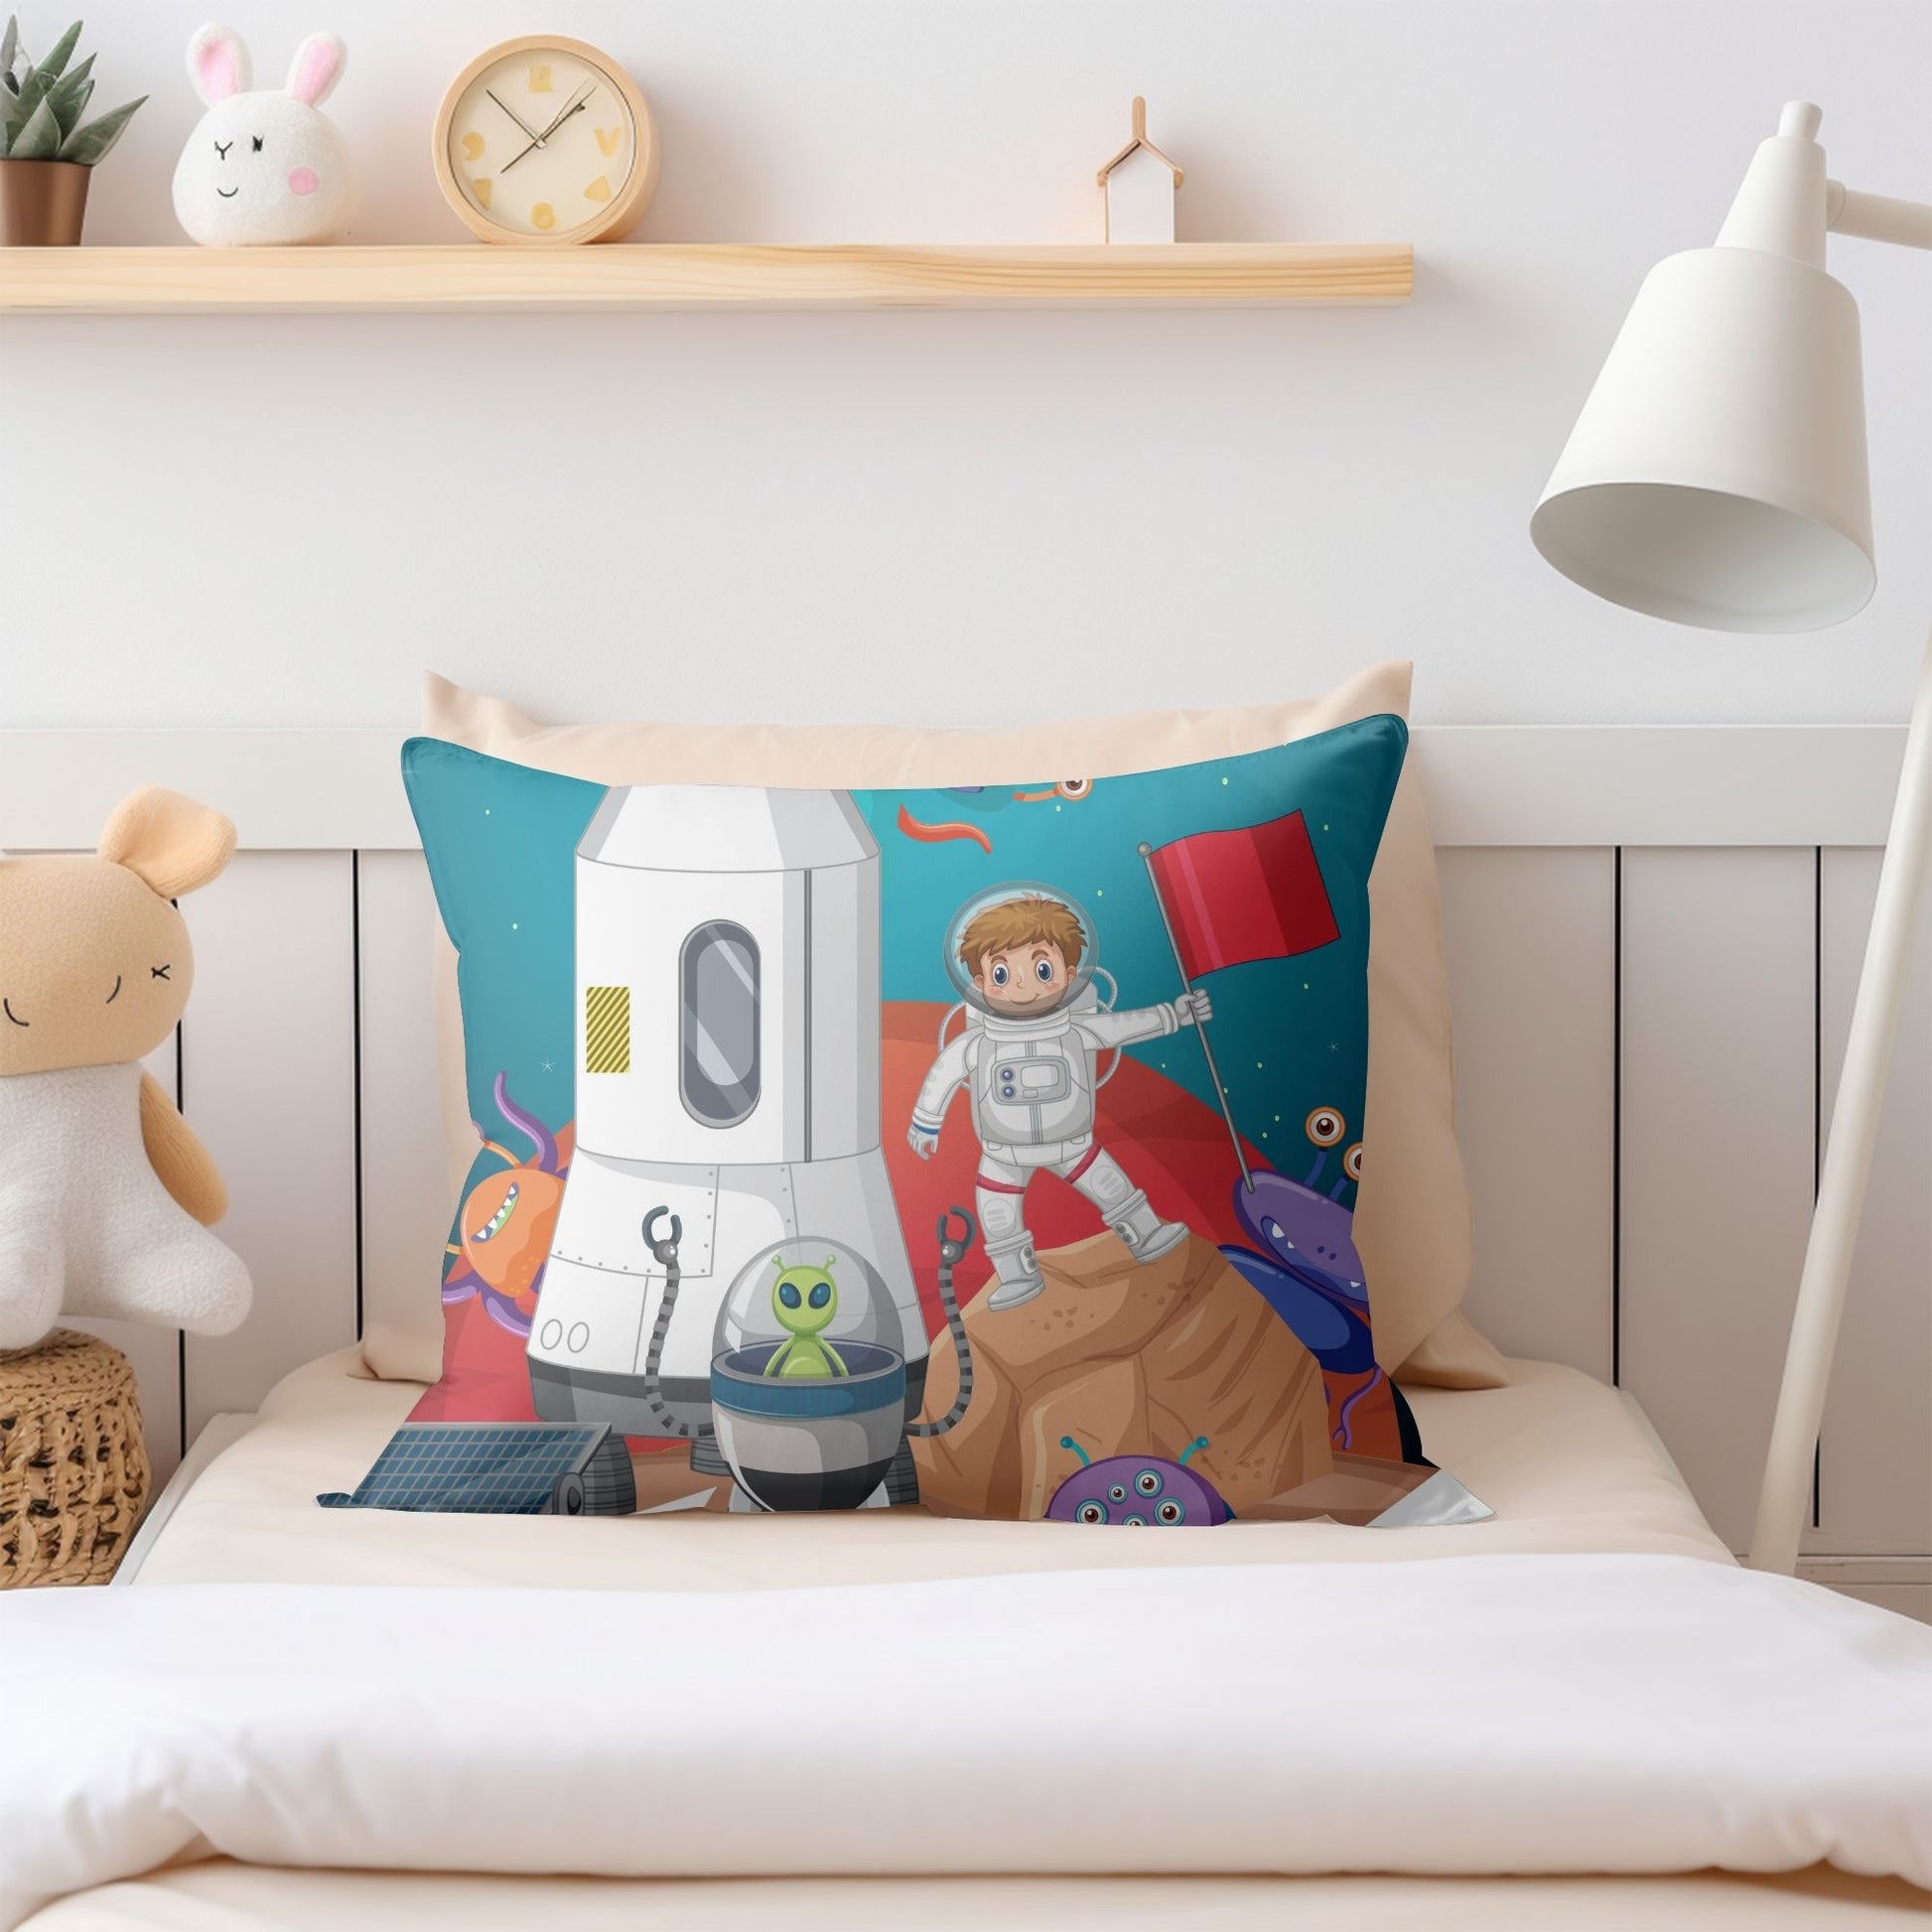 Fun-filled pillow featuring a young space explorer for kids' spaces.